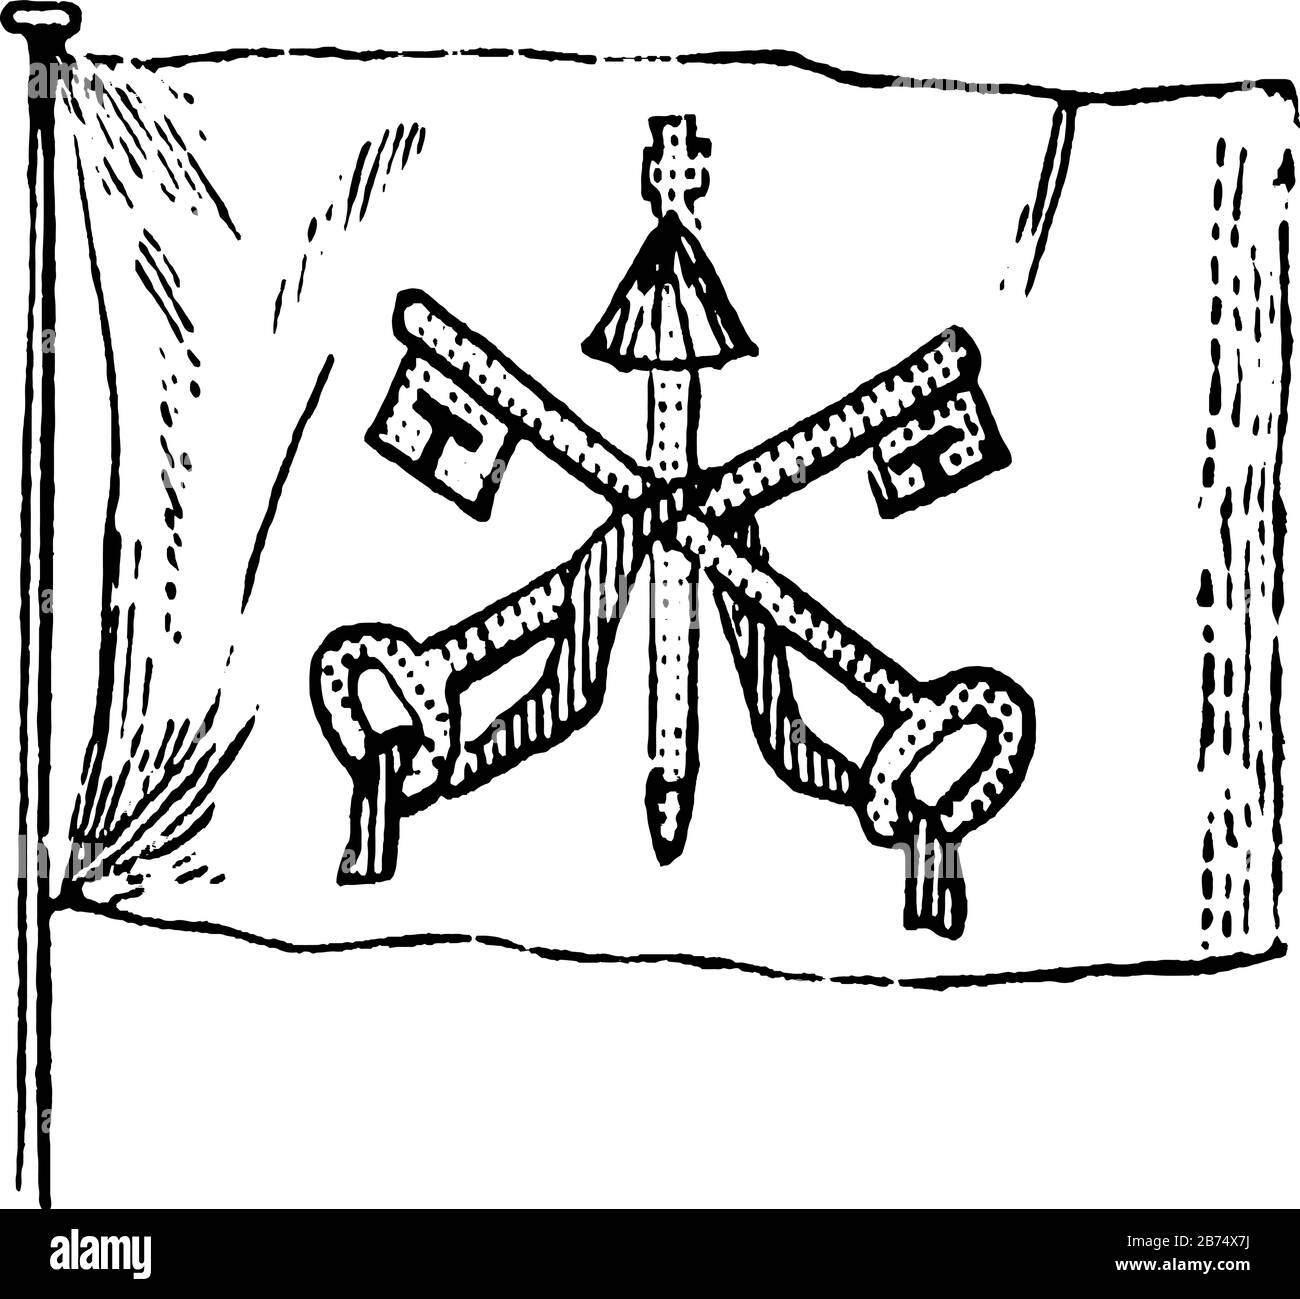 Flag of the Papal States, 1881, it has two cross keys connected with a cord and one verticle rod in center, vintage line drawing or engraving illustra Stock Vector